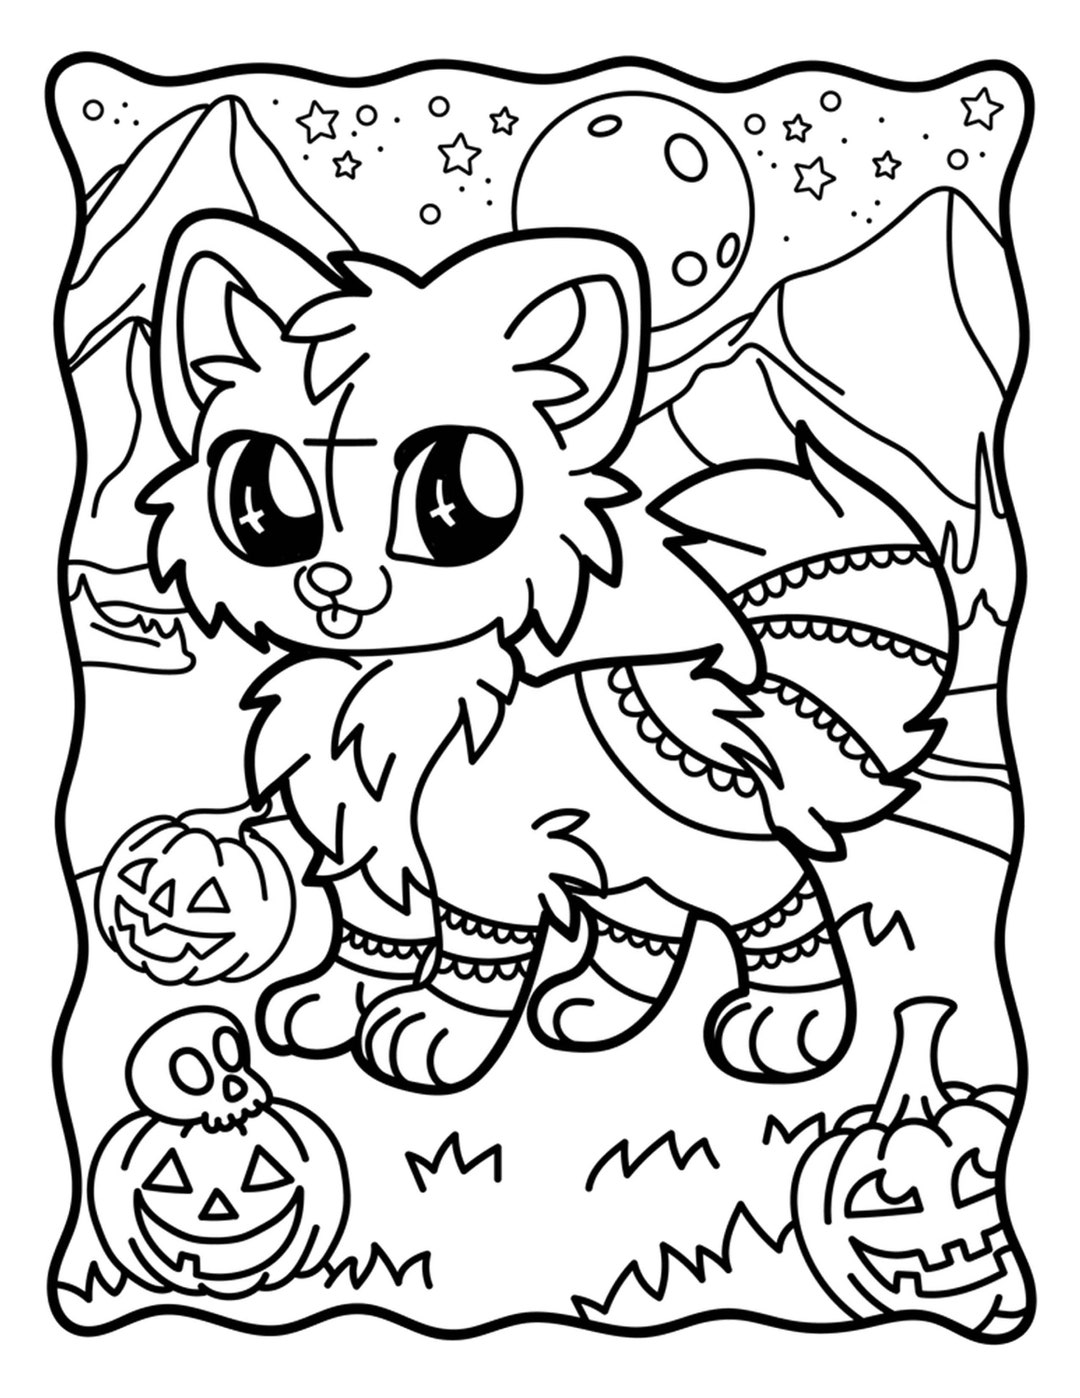 Halloween coloring pages for kids halloween cats collection